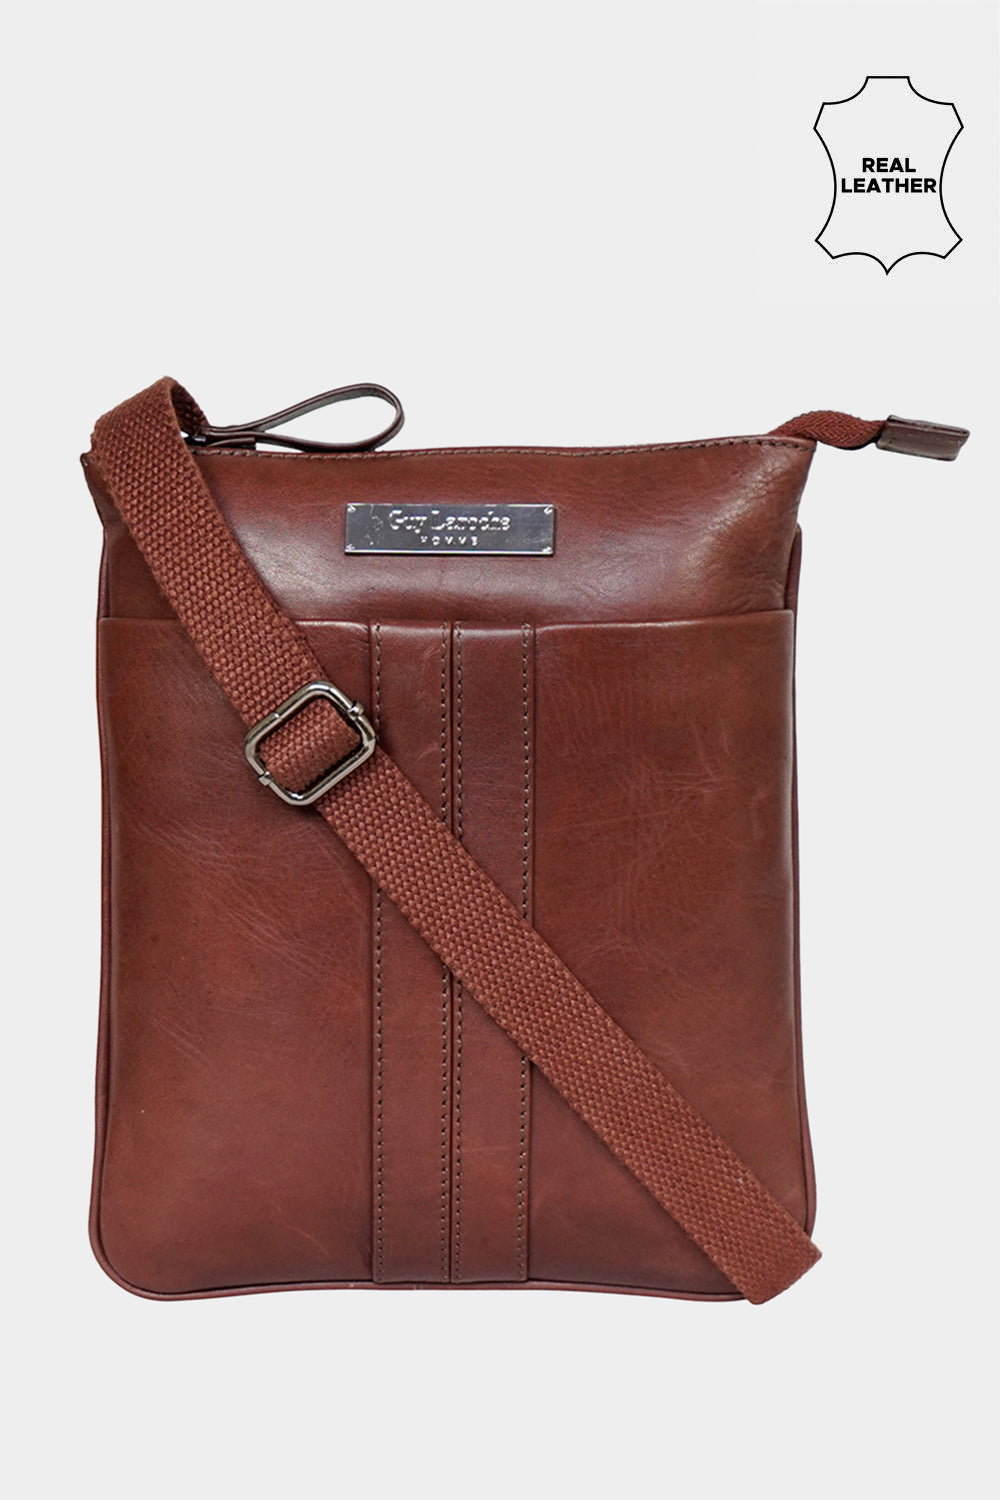 Storite Stylish Small PU Leather Sling Cross Body Travel Office Business  Messenger One Side Shoulder Bag for Men Women 255 x7x20cm TanBrown   Amazonin Fashion